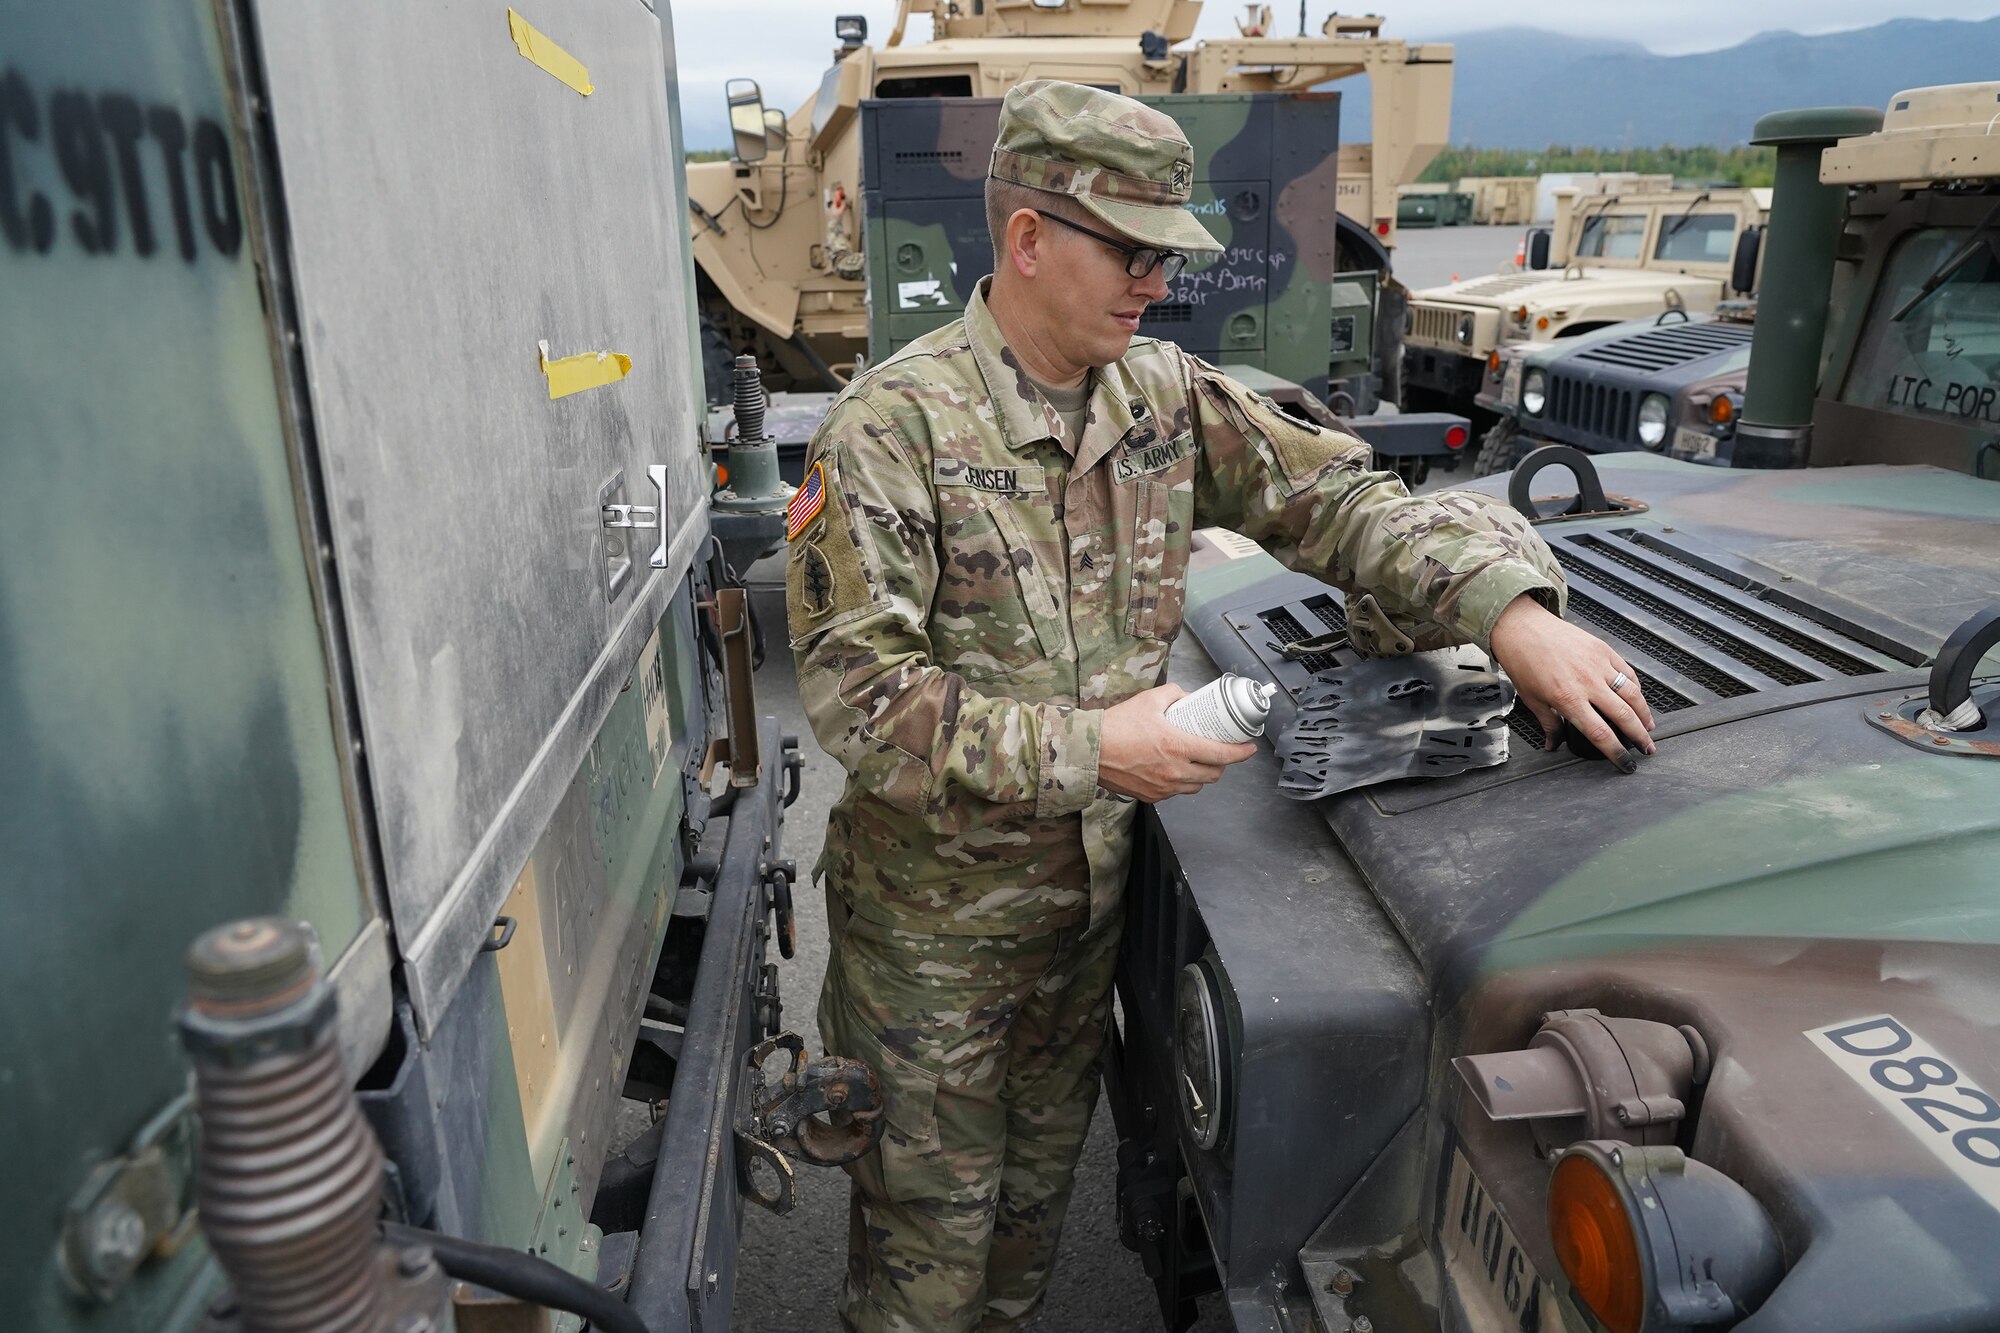 Army Sgt. Jay Jensen, a Multichannel Transmission Systems Operator-Maintainer and native of Salt Lake City, Utah, assigned to Headquarters and Headquarters Company, 725th Brigade Support Battalion (Airborne), 4th Infantry Brigade Combat Team. (Airborne), 25th Infantry Division, U.S. Army Alaska, prepares to paint identifying numbers on a vehicle prior to transportation operations on Joint Base Elmendorf-Richardson, Alaska, Aug. 14, 2019, as part of a joint readiness exercise. This exercise allows the Army, Air Force and Navy to move material and personnel using ground, ship, air and rail methods of transportation.